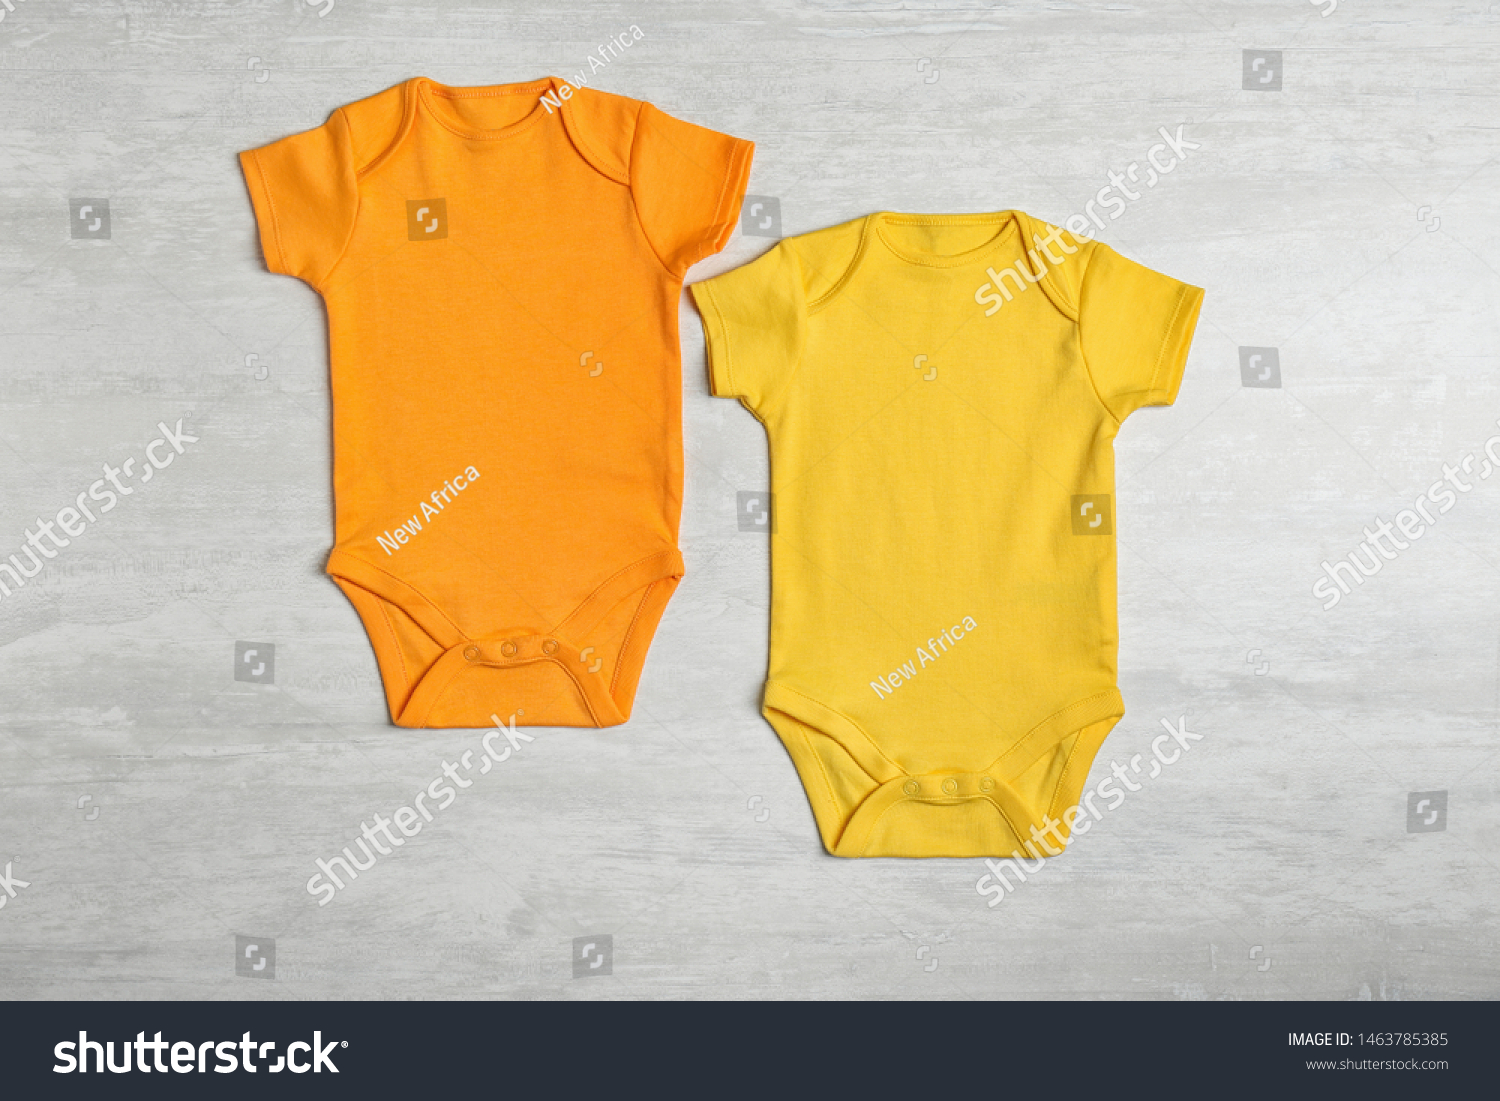 Different baby bodysuits on wooden background, top view #1463785385